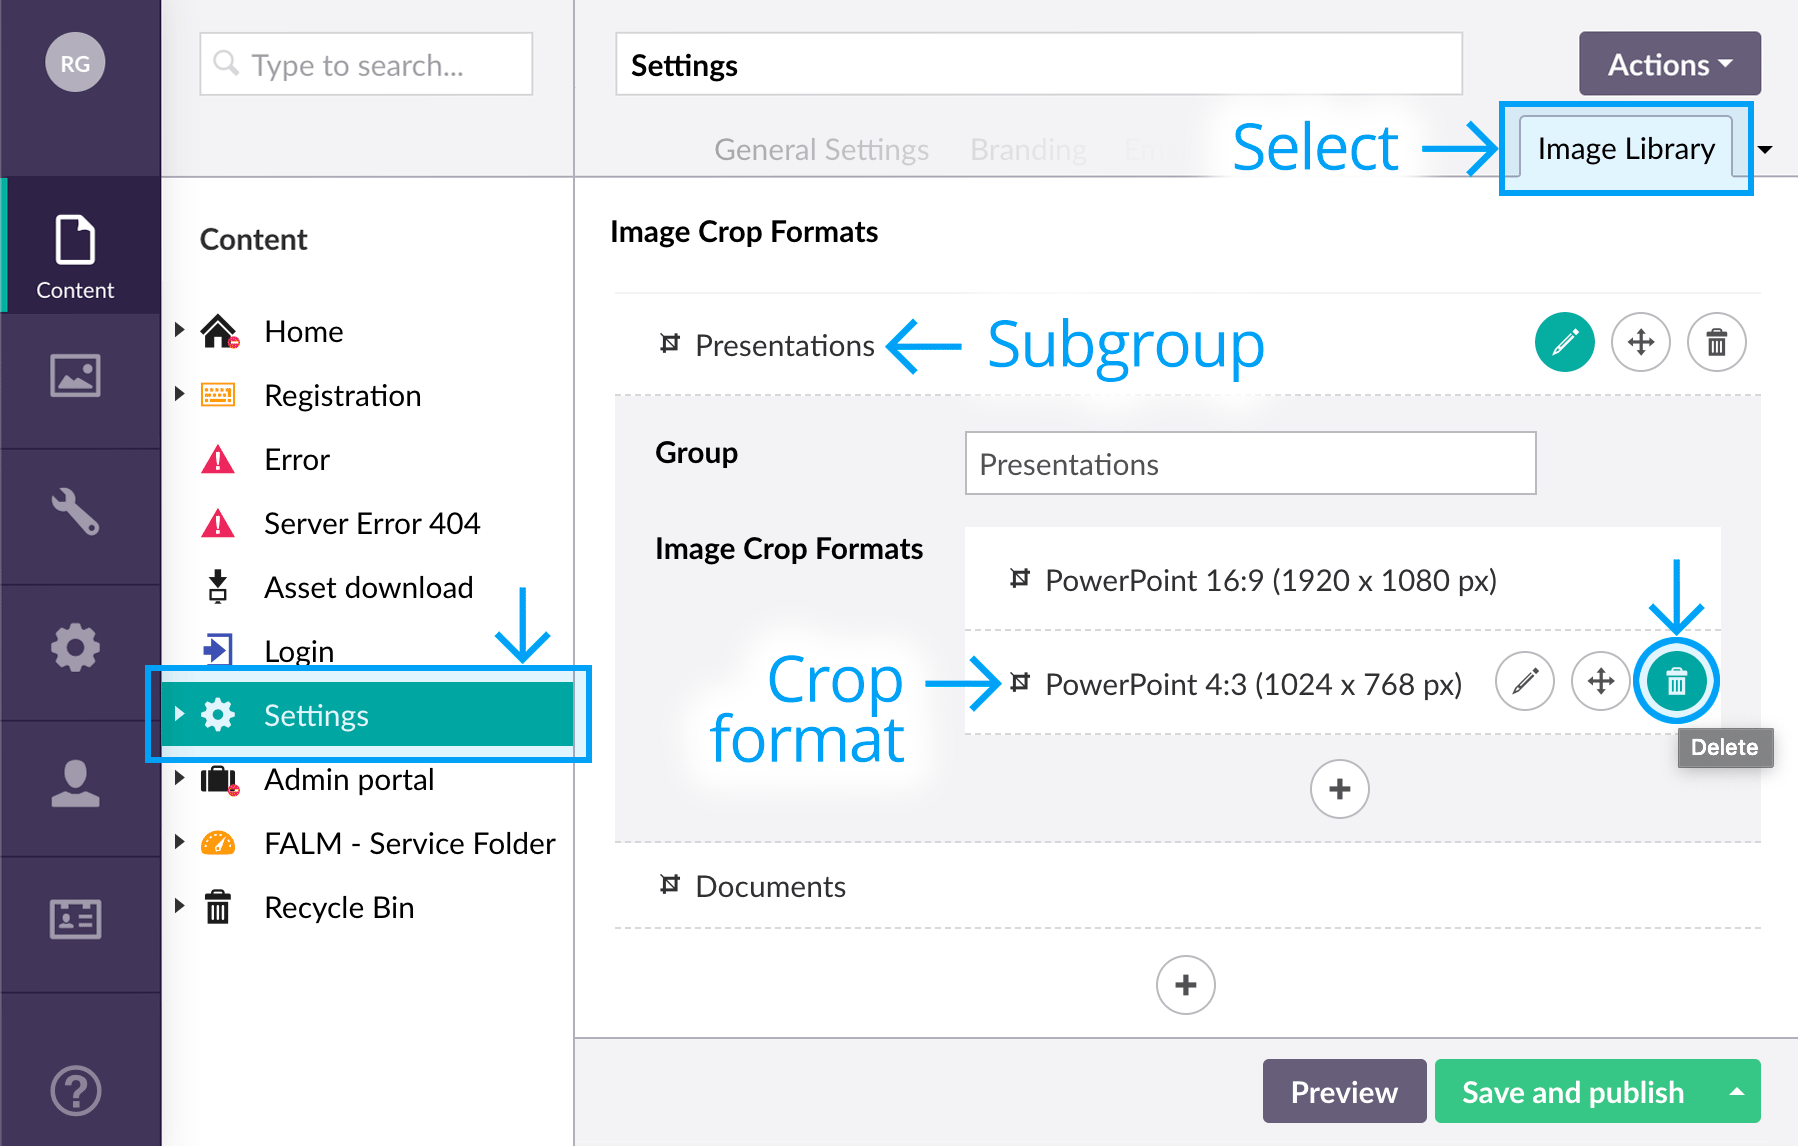 Delete an image crop format or group